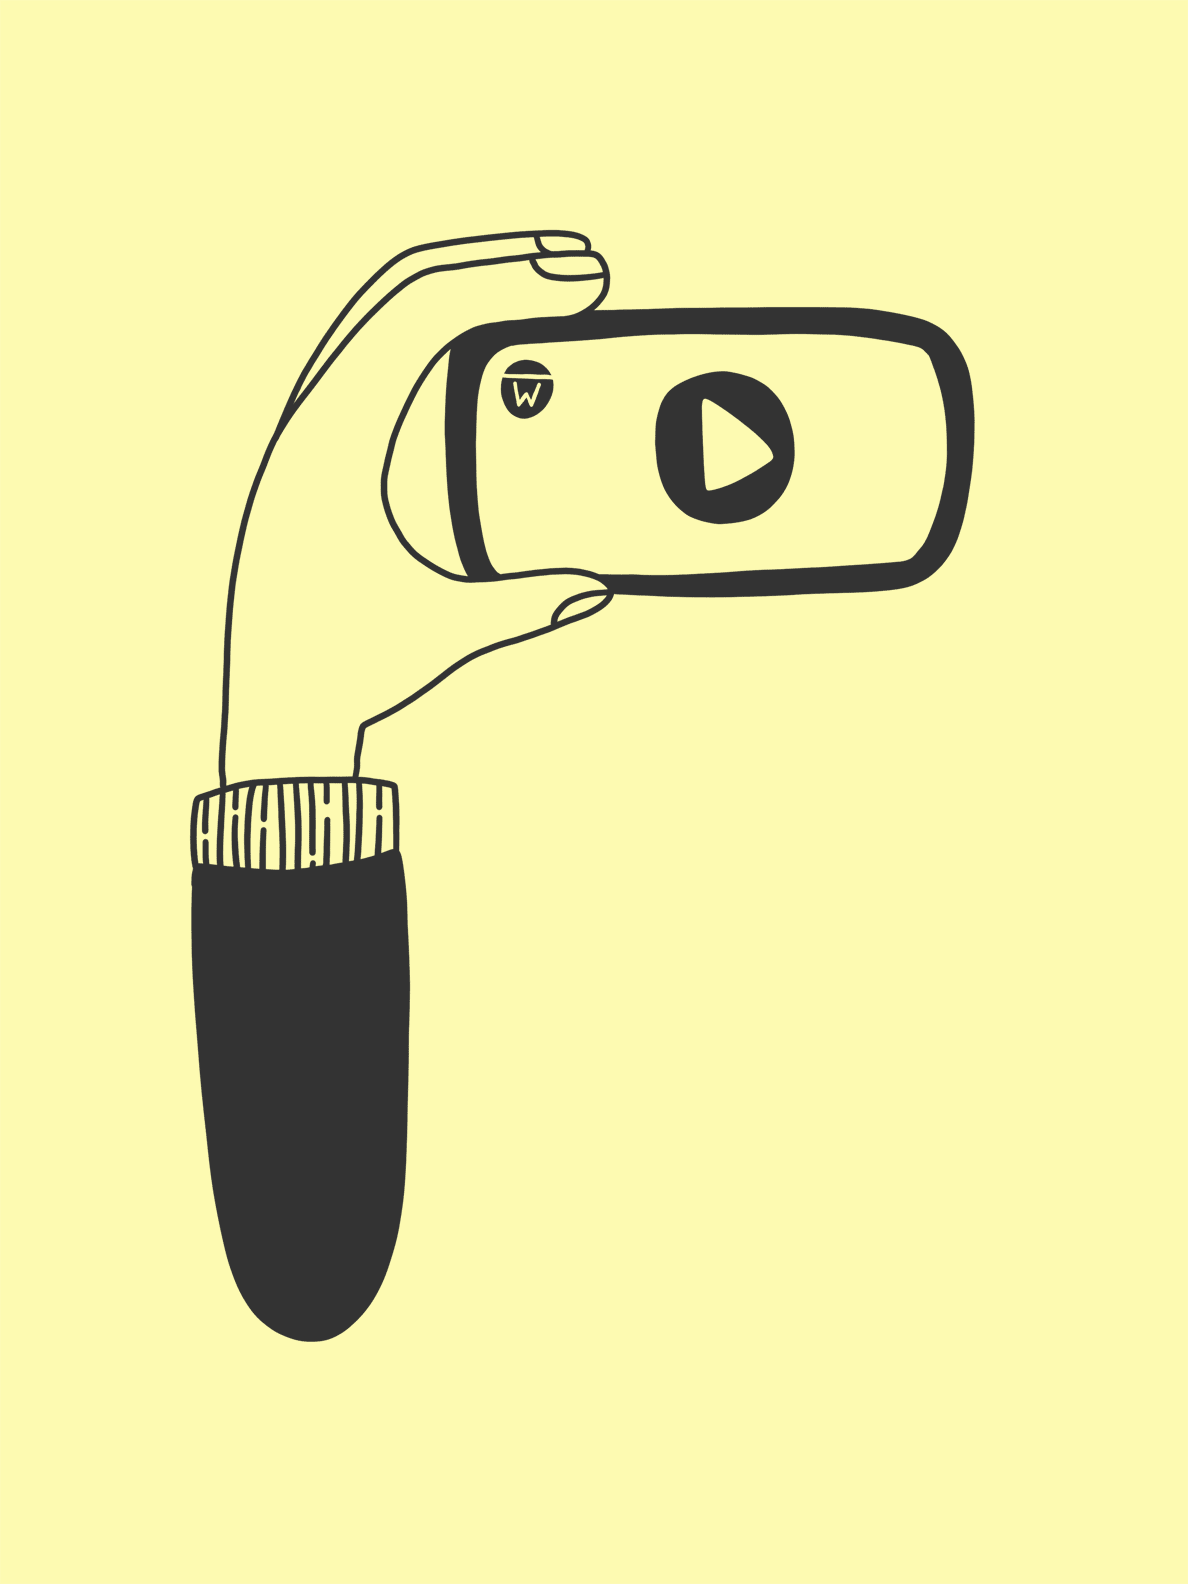 A hand holding a phone